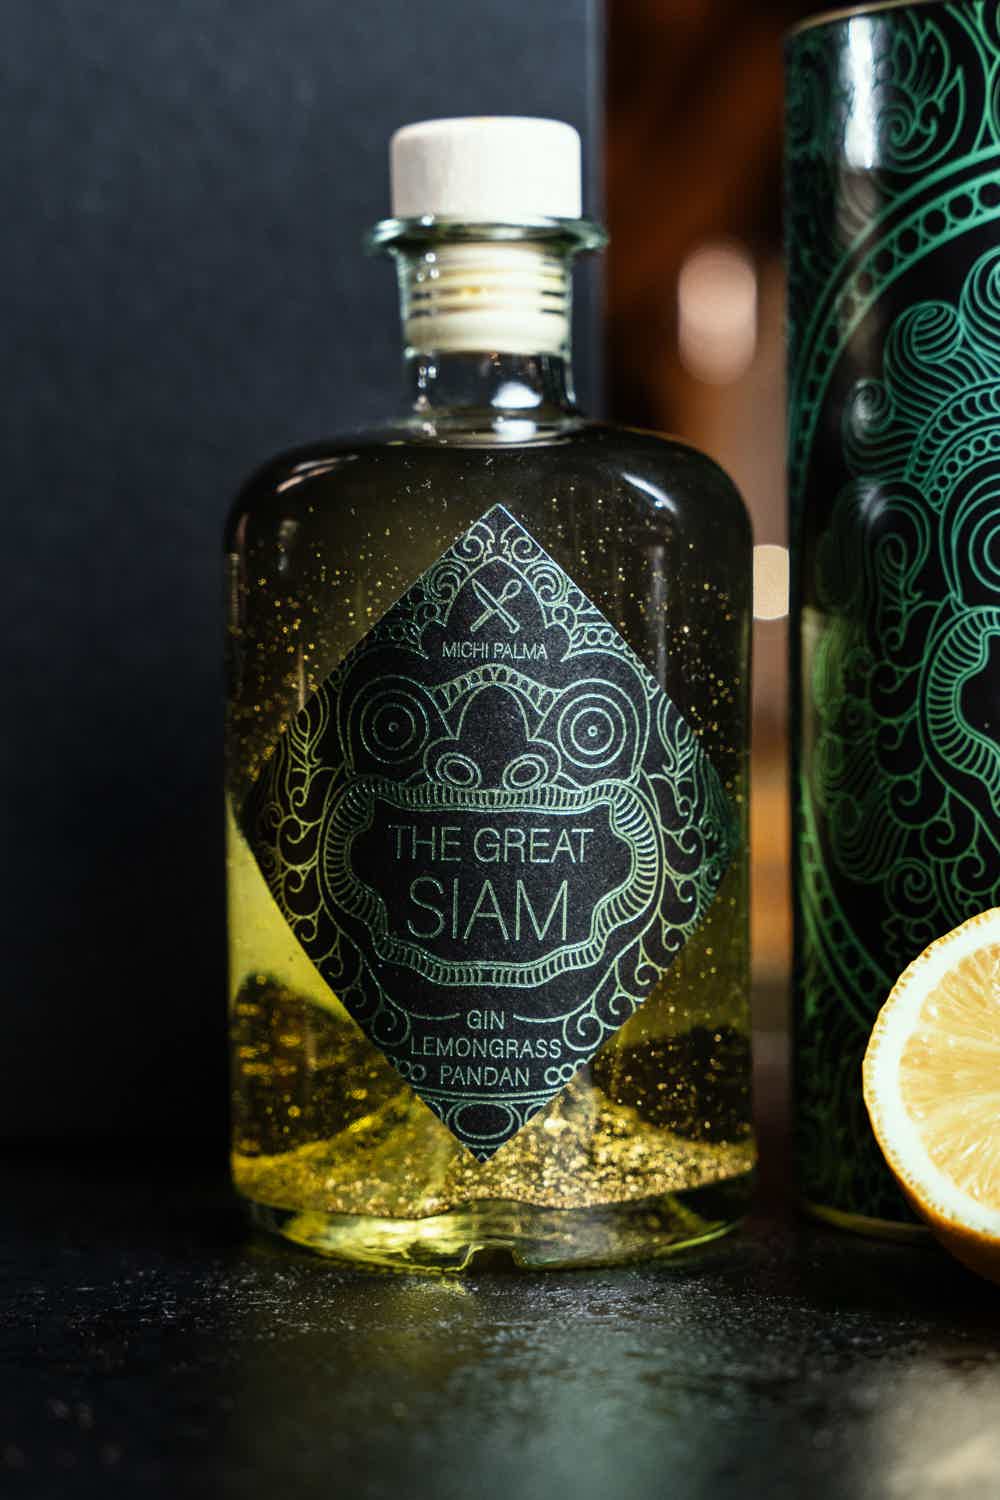 The Great Trio, Classic Gin Gift Set: The Great '20s Golden-Berry-Berlin-Style Gin, The Great Siam Lemongrass-Pandan Gin, The Great Oriental Golden-Cardamom-Saffron Gin